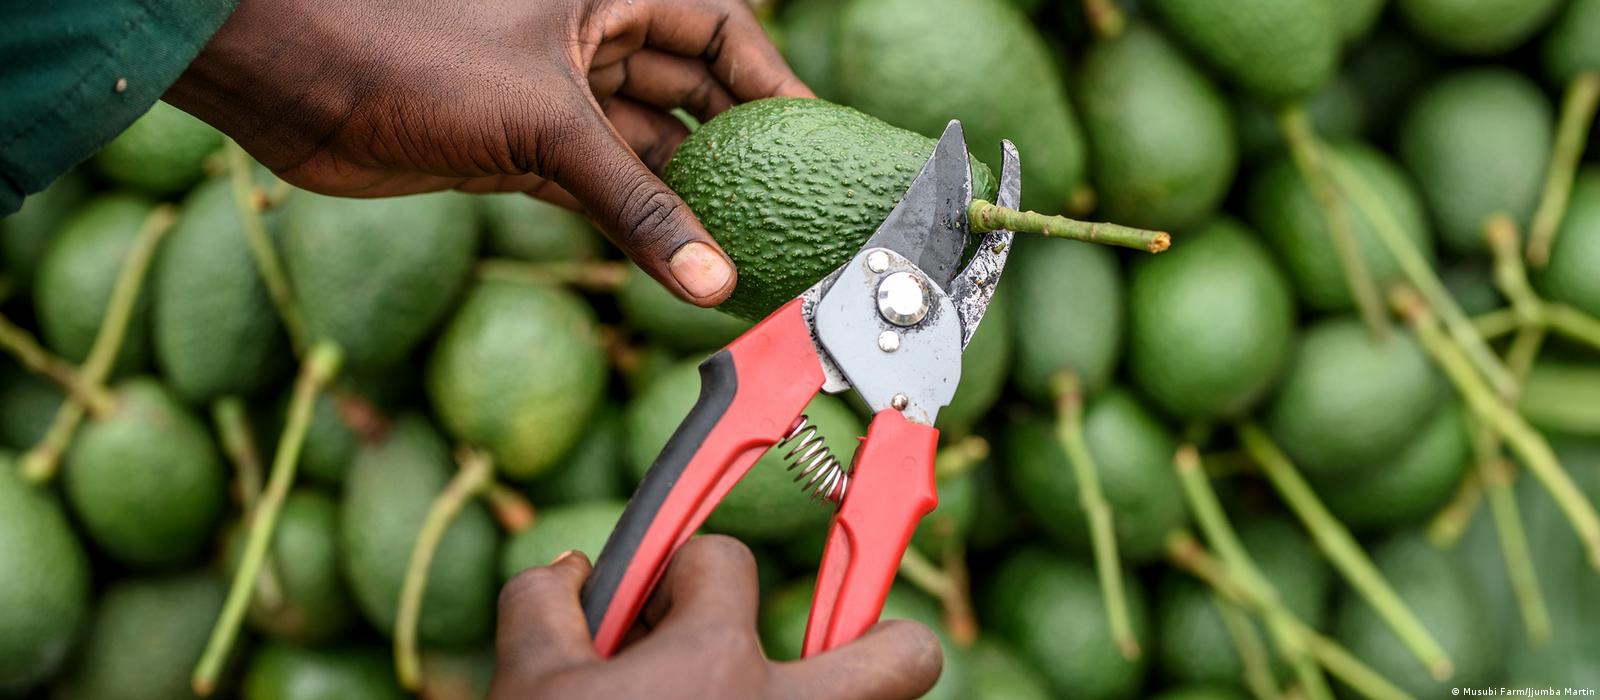 Green gold: Avocado farming on the rise in Africa â€“ DW â€“ 05/01/2021